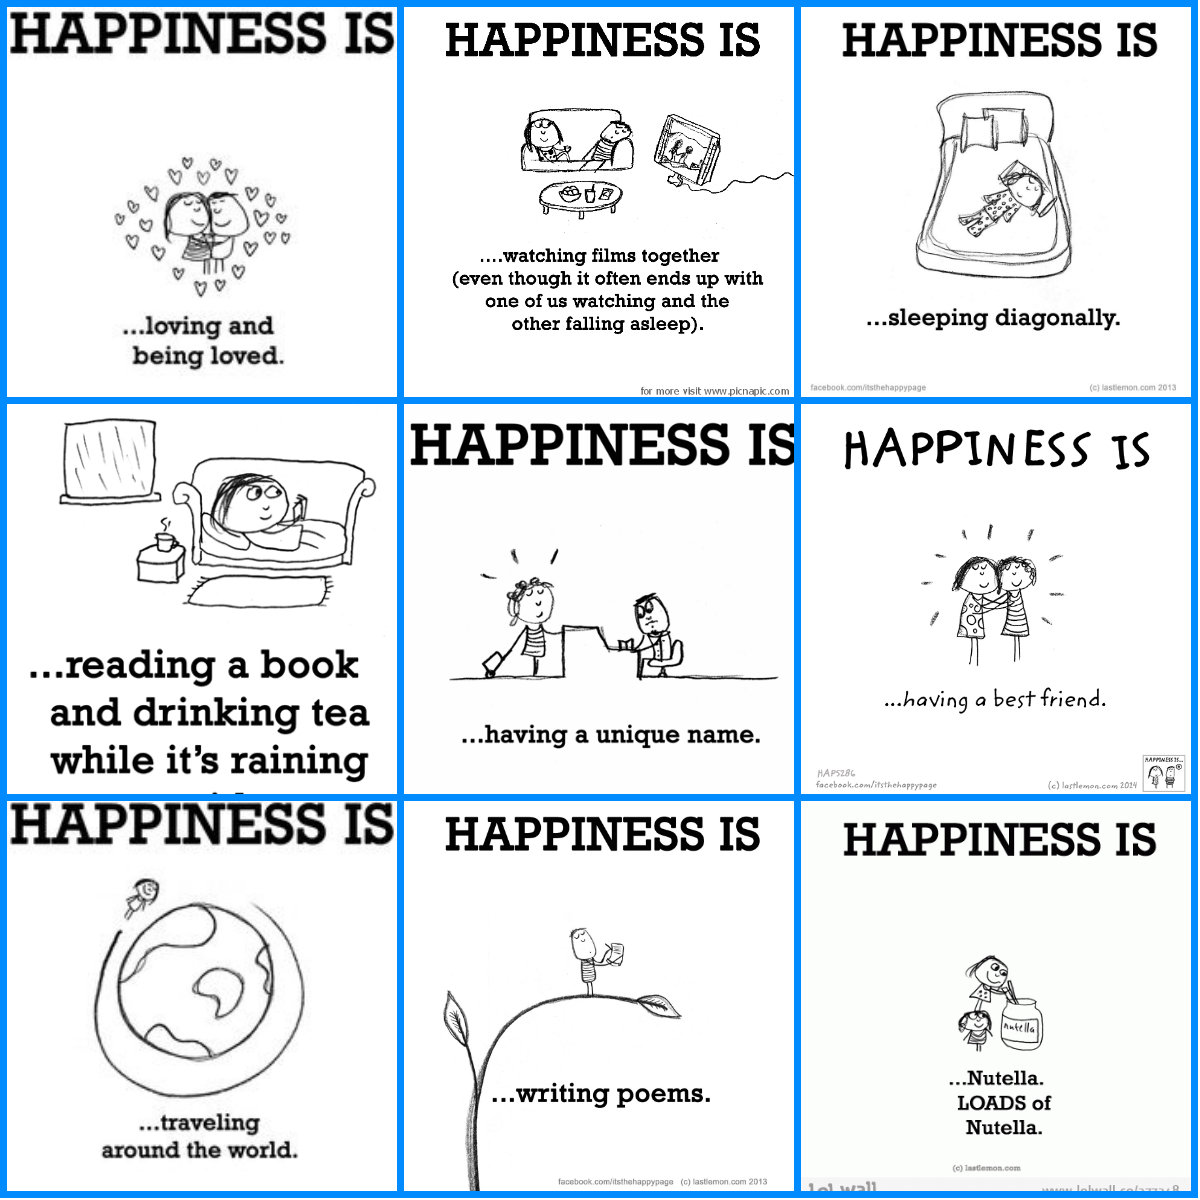 Happiness collage